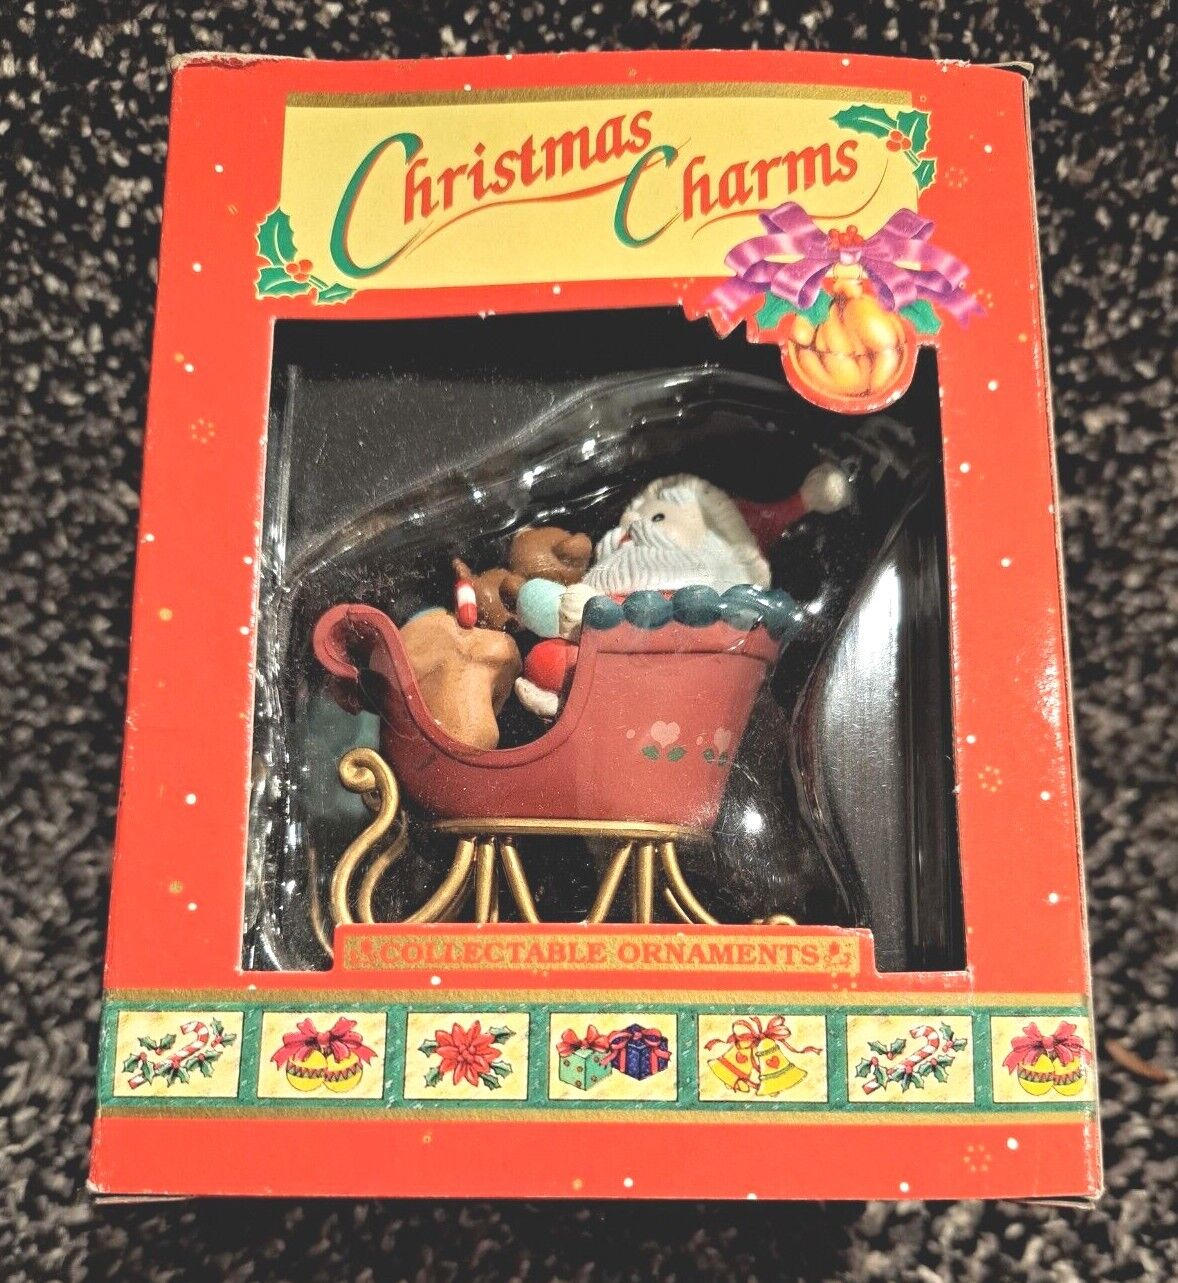 Lustre Fame Christmas Charms 1992 Christmas Ornaments in the Box, 8 Designs